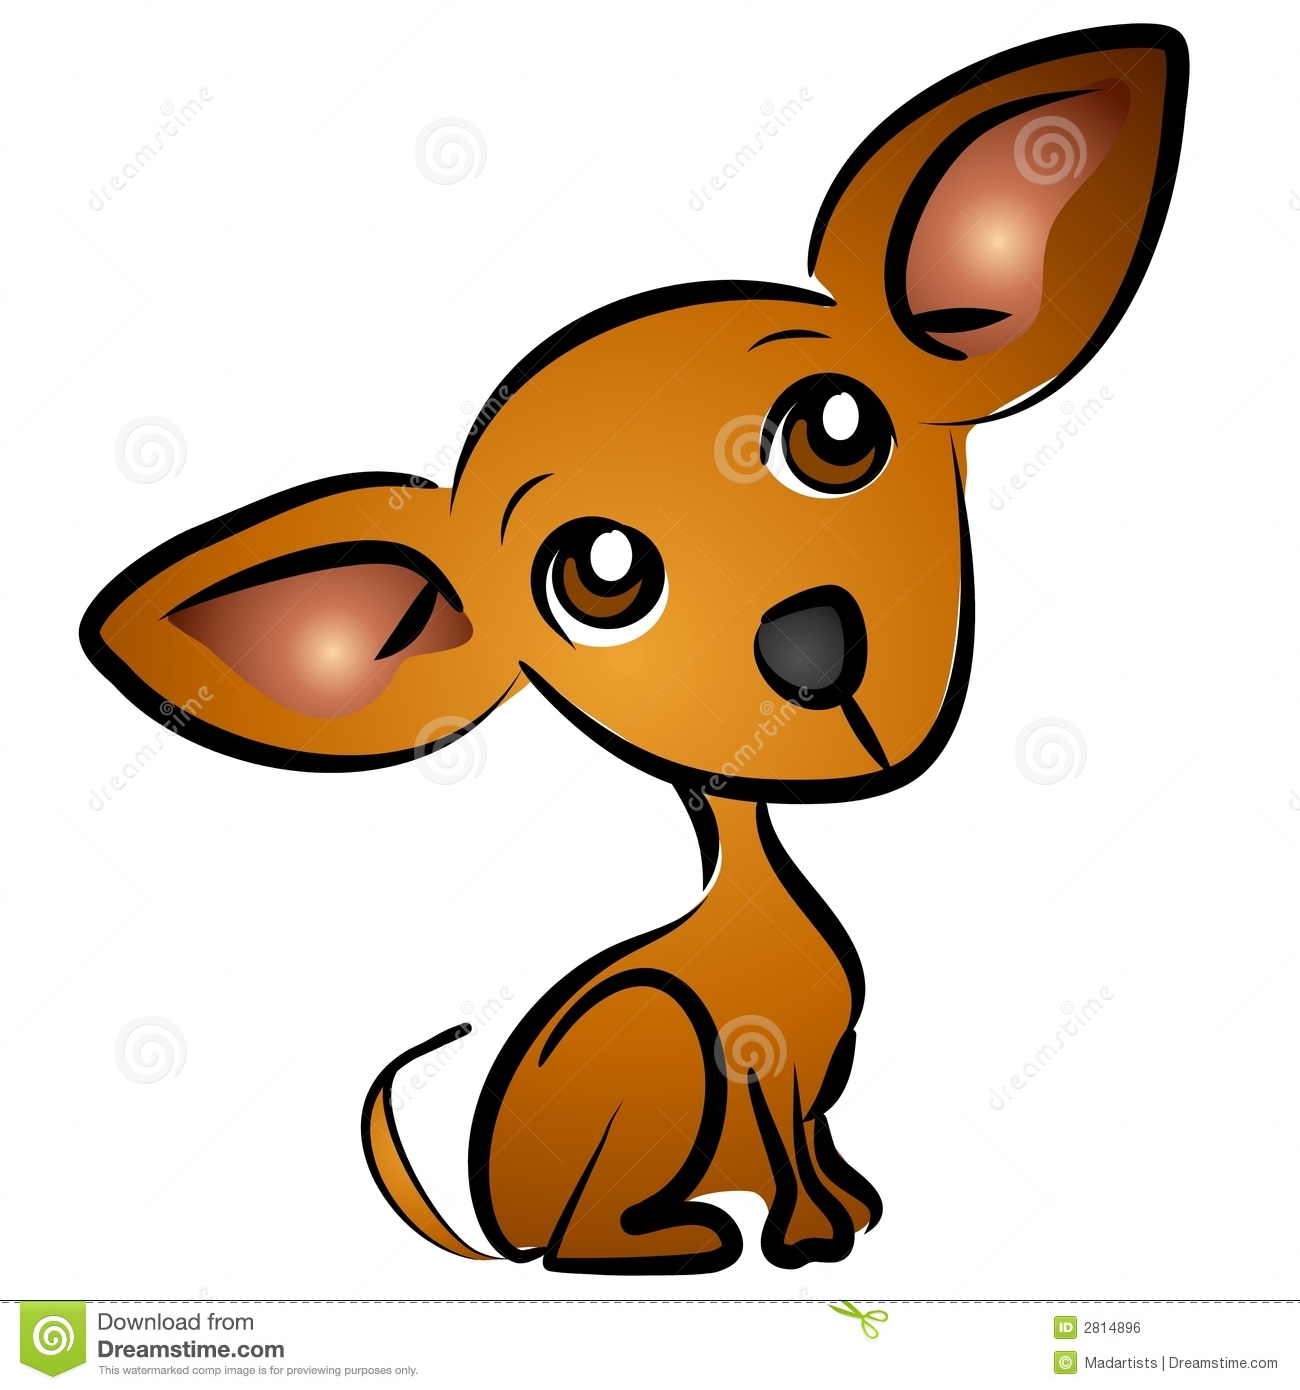 Small Brown Chihuahua Dog Cartoon Clip Art Illustration With Classic